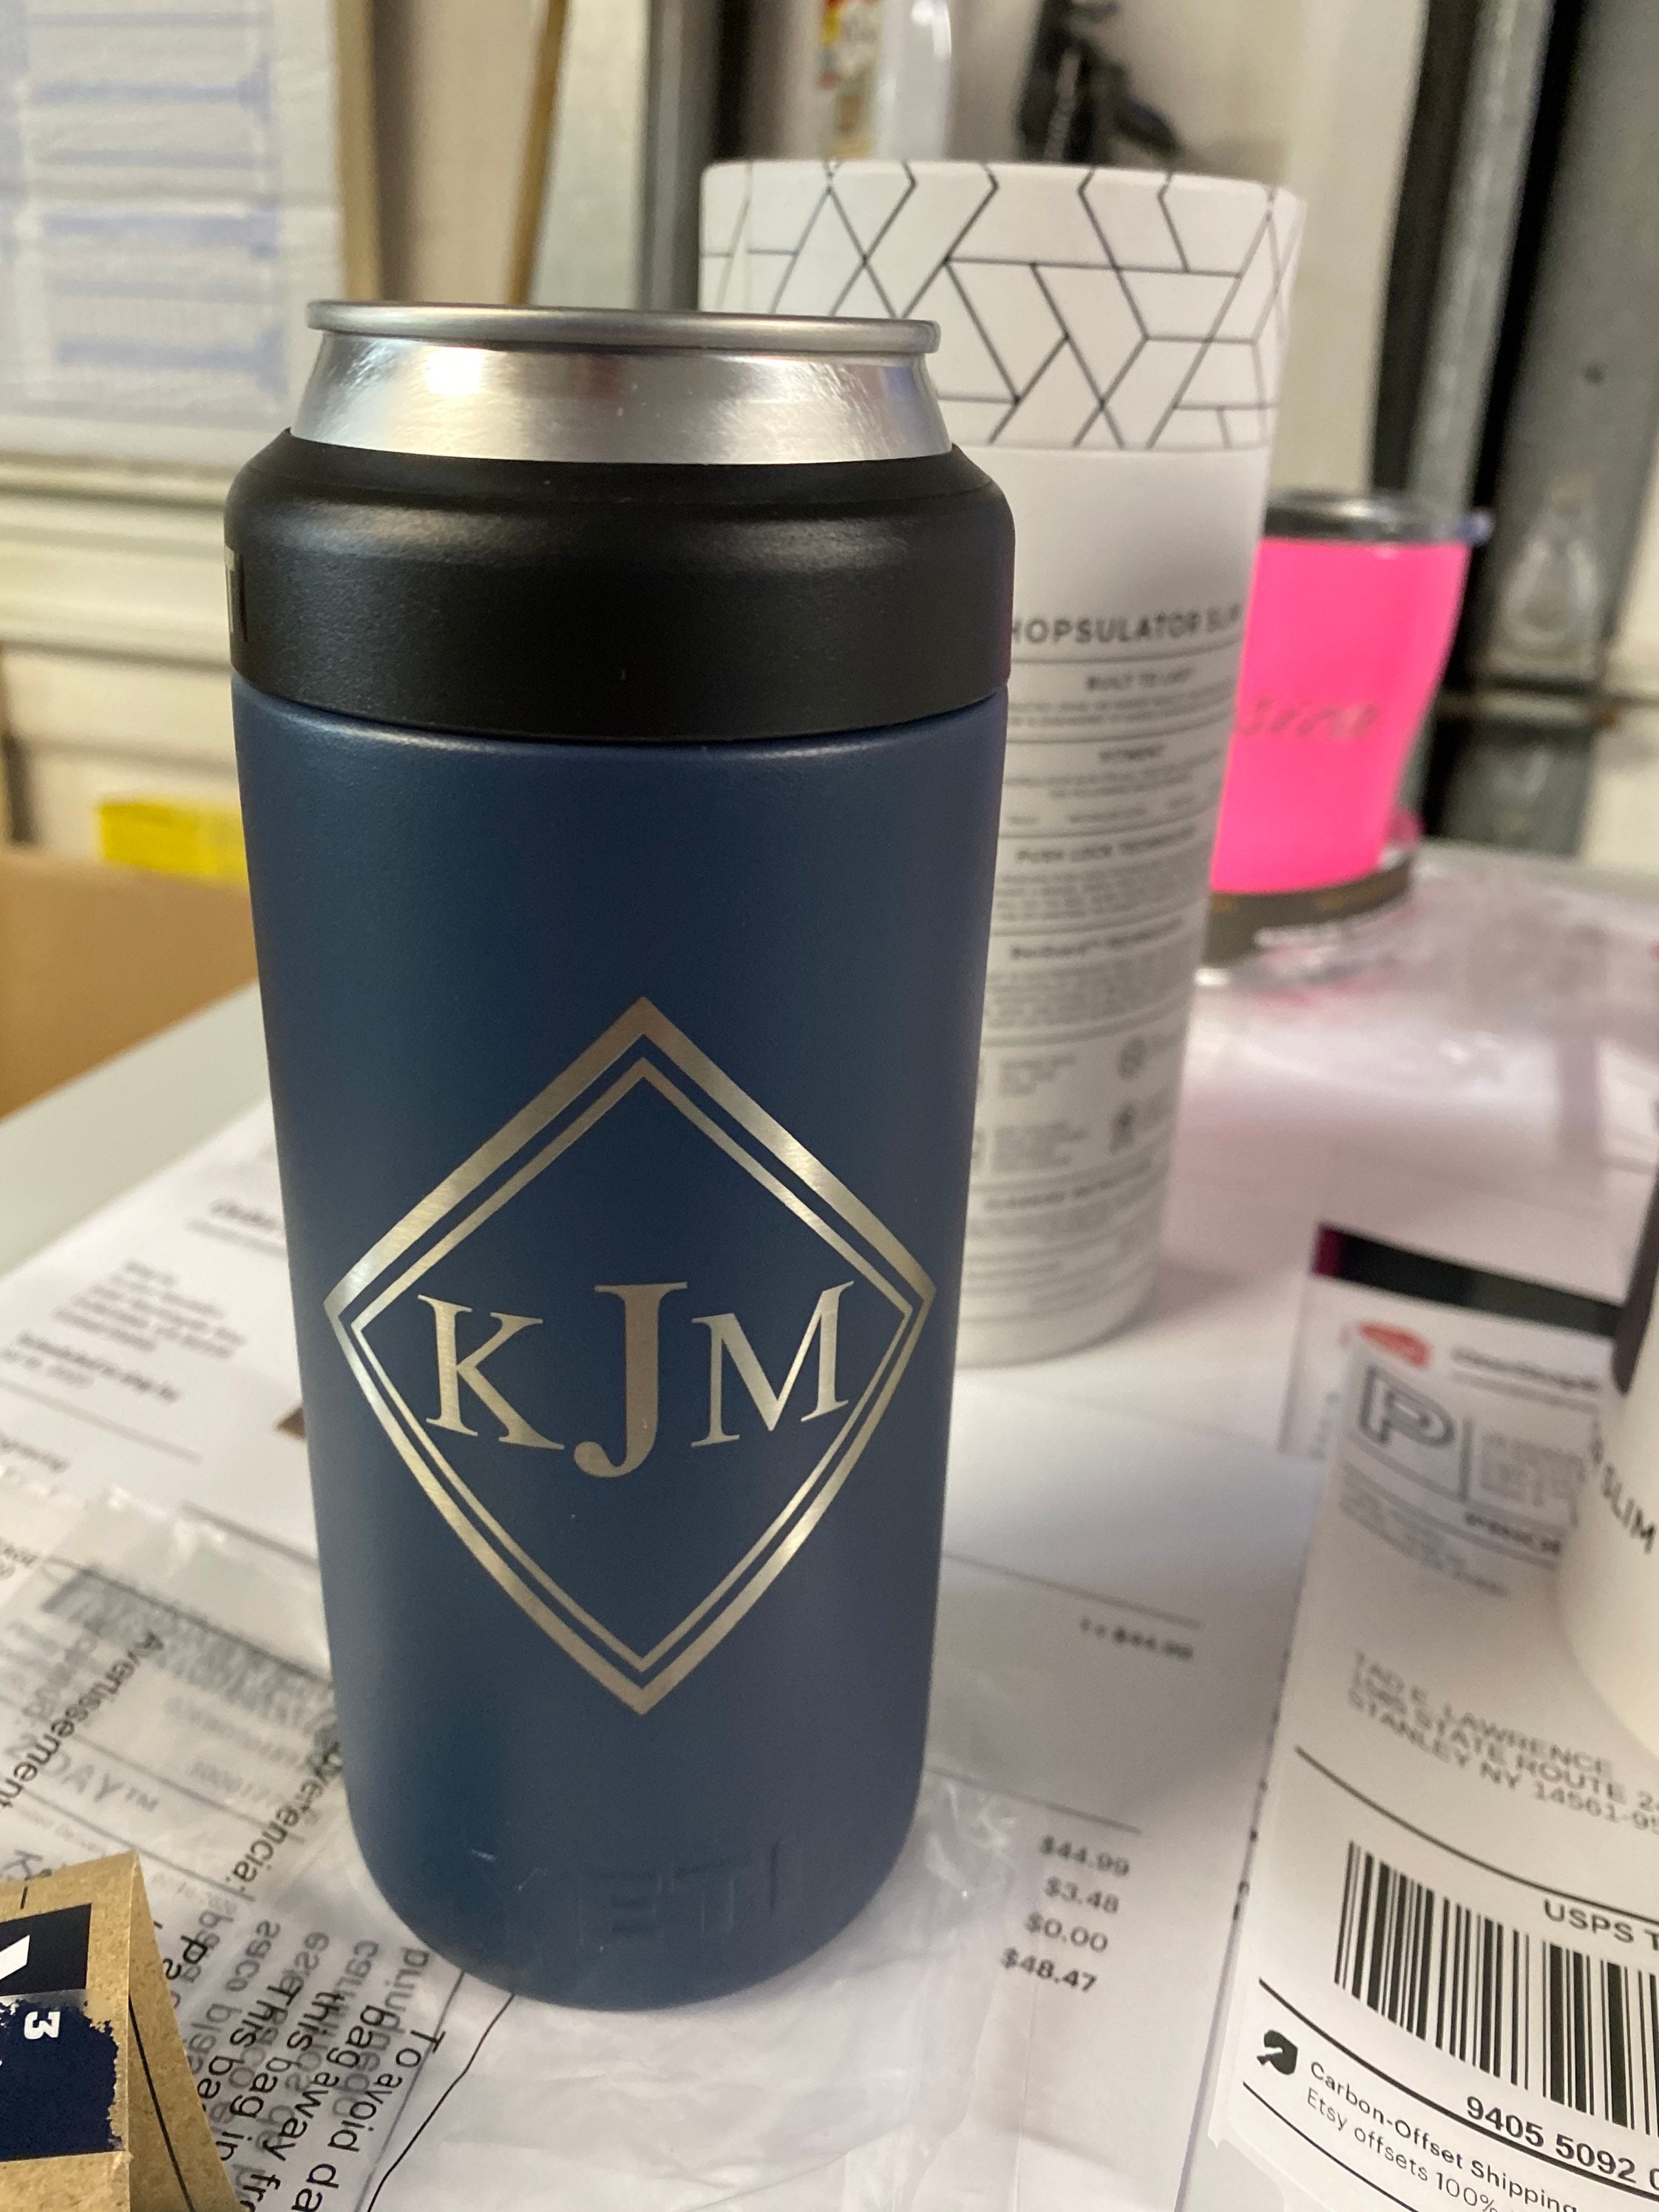 Laser Engraved Authentic Yeti Rambler 16 Oz. COLSTER TALL Can Insulator  Navy Stainless Steel Personalized Vacuum Insulated YETI 